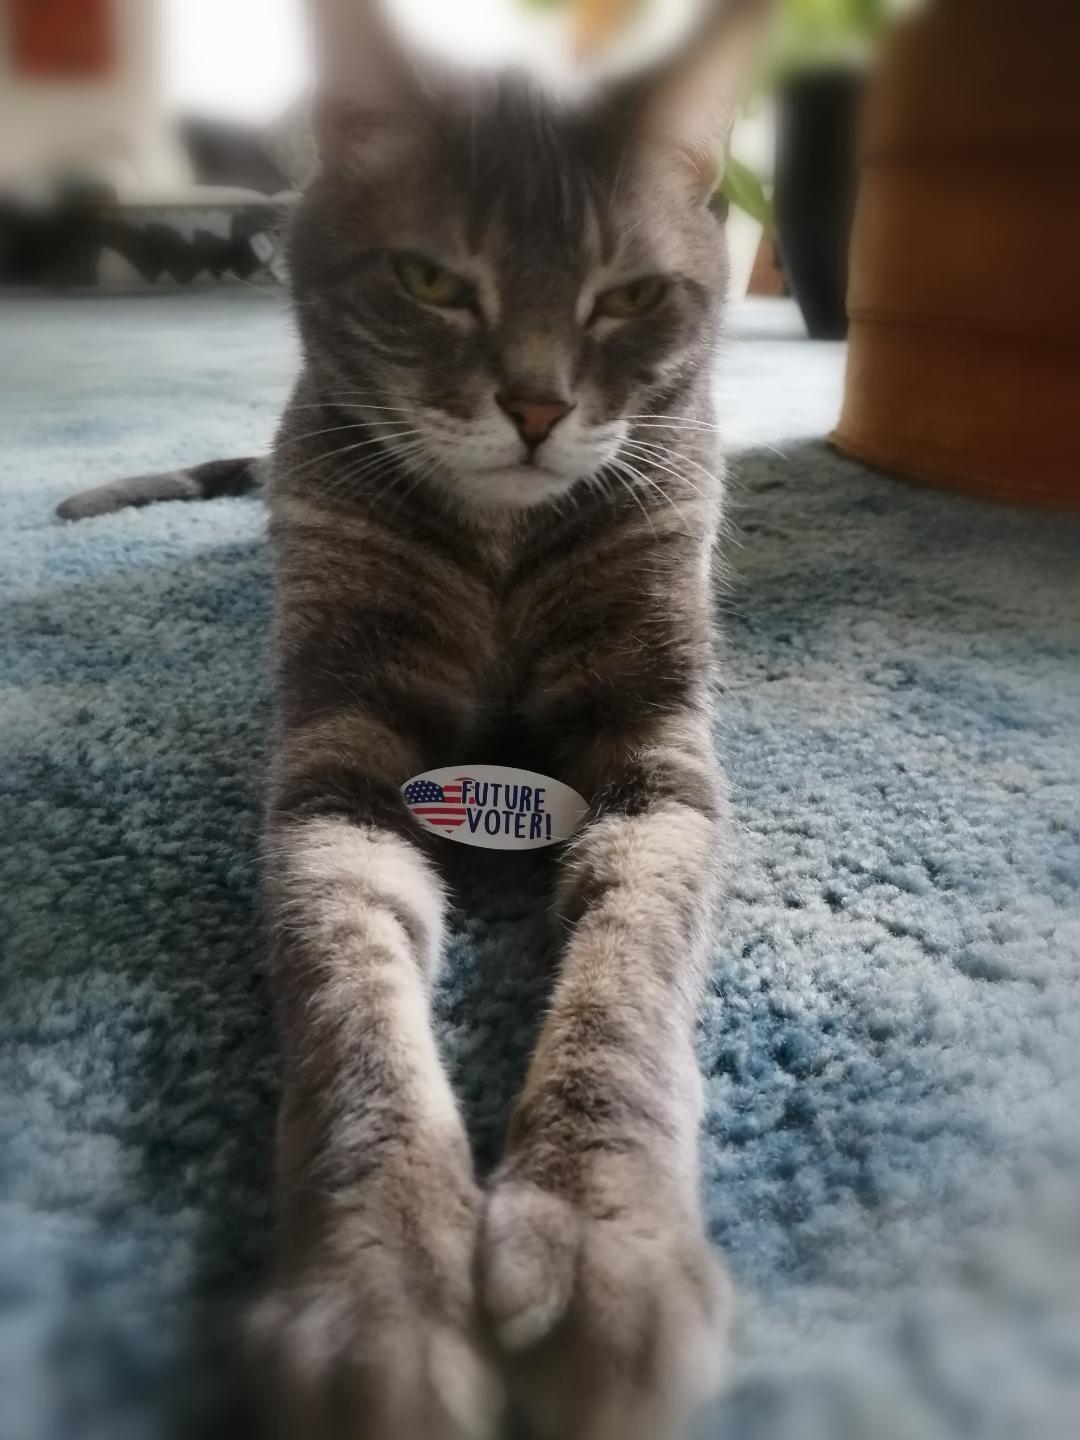 You are currently viewing My Cat Wants To Vote ~ by Katrina Curtiss 10/21/2020